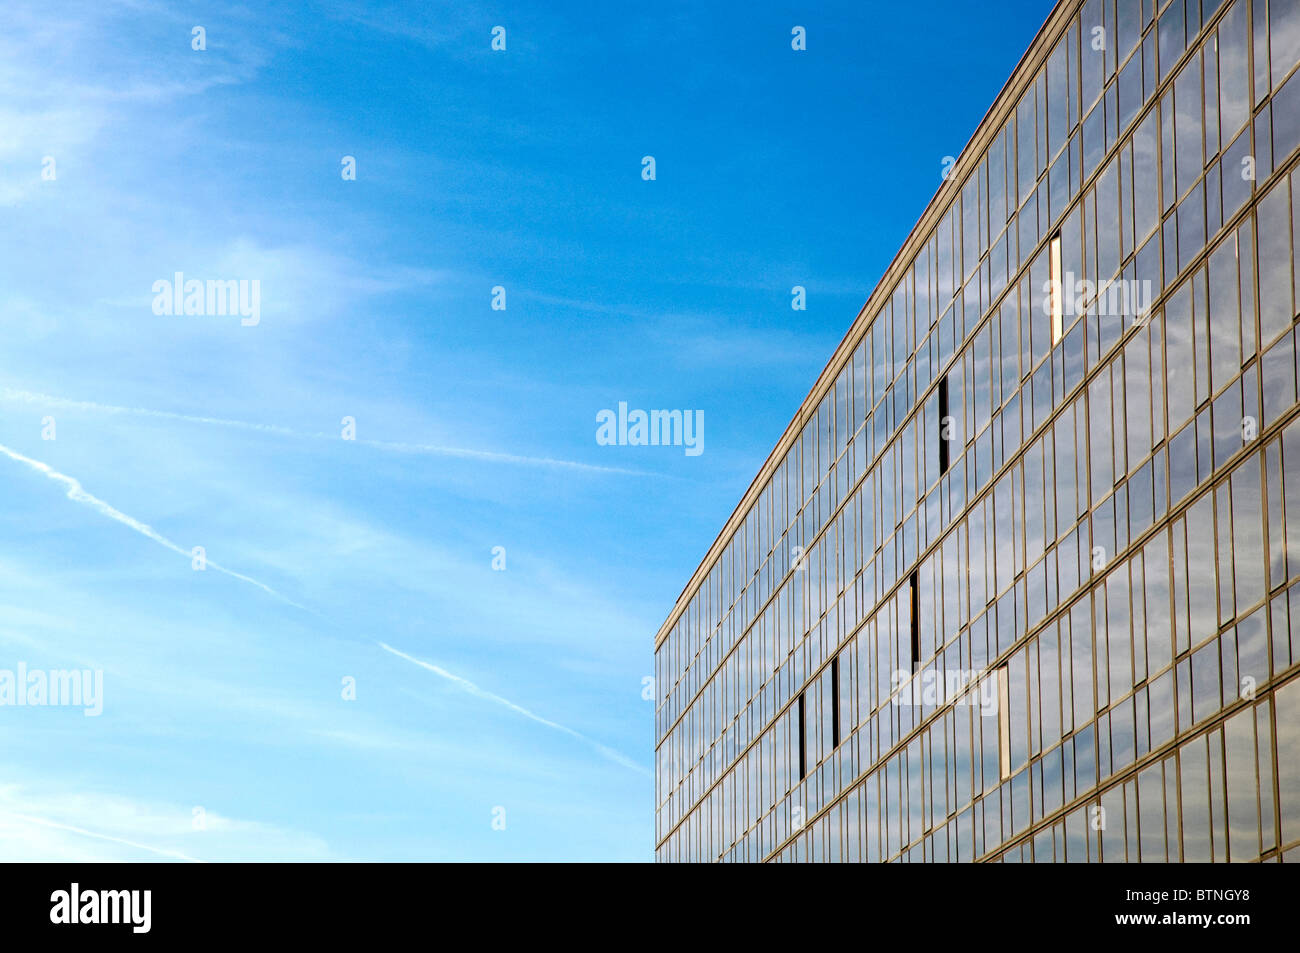 Modern building under blue sky with clouds Stock Photo